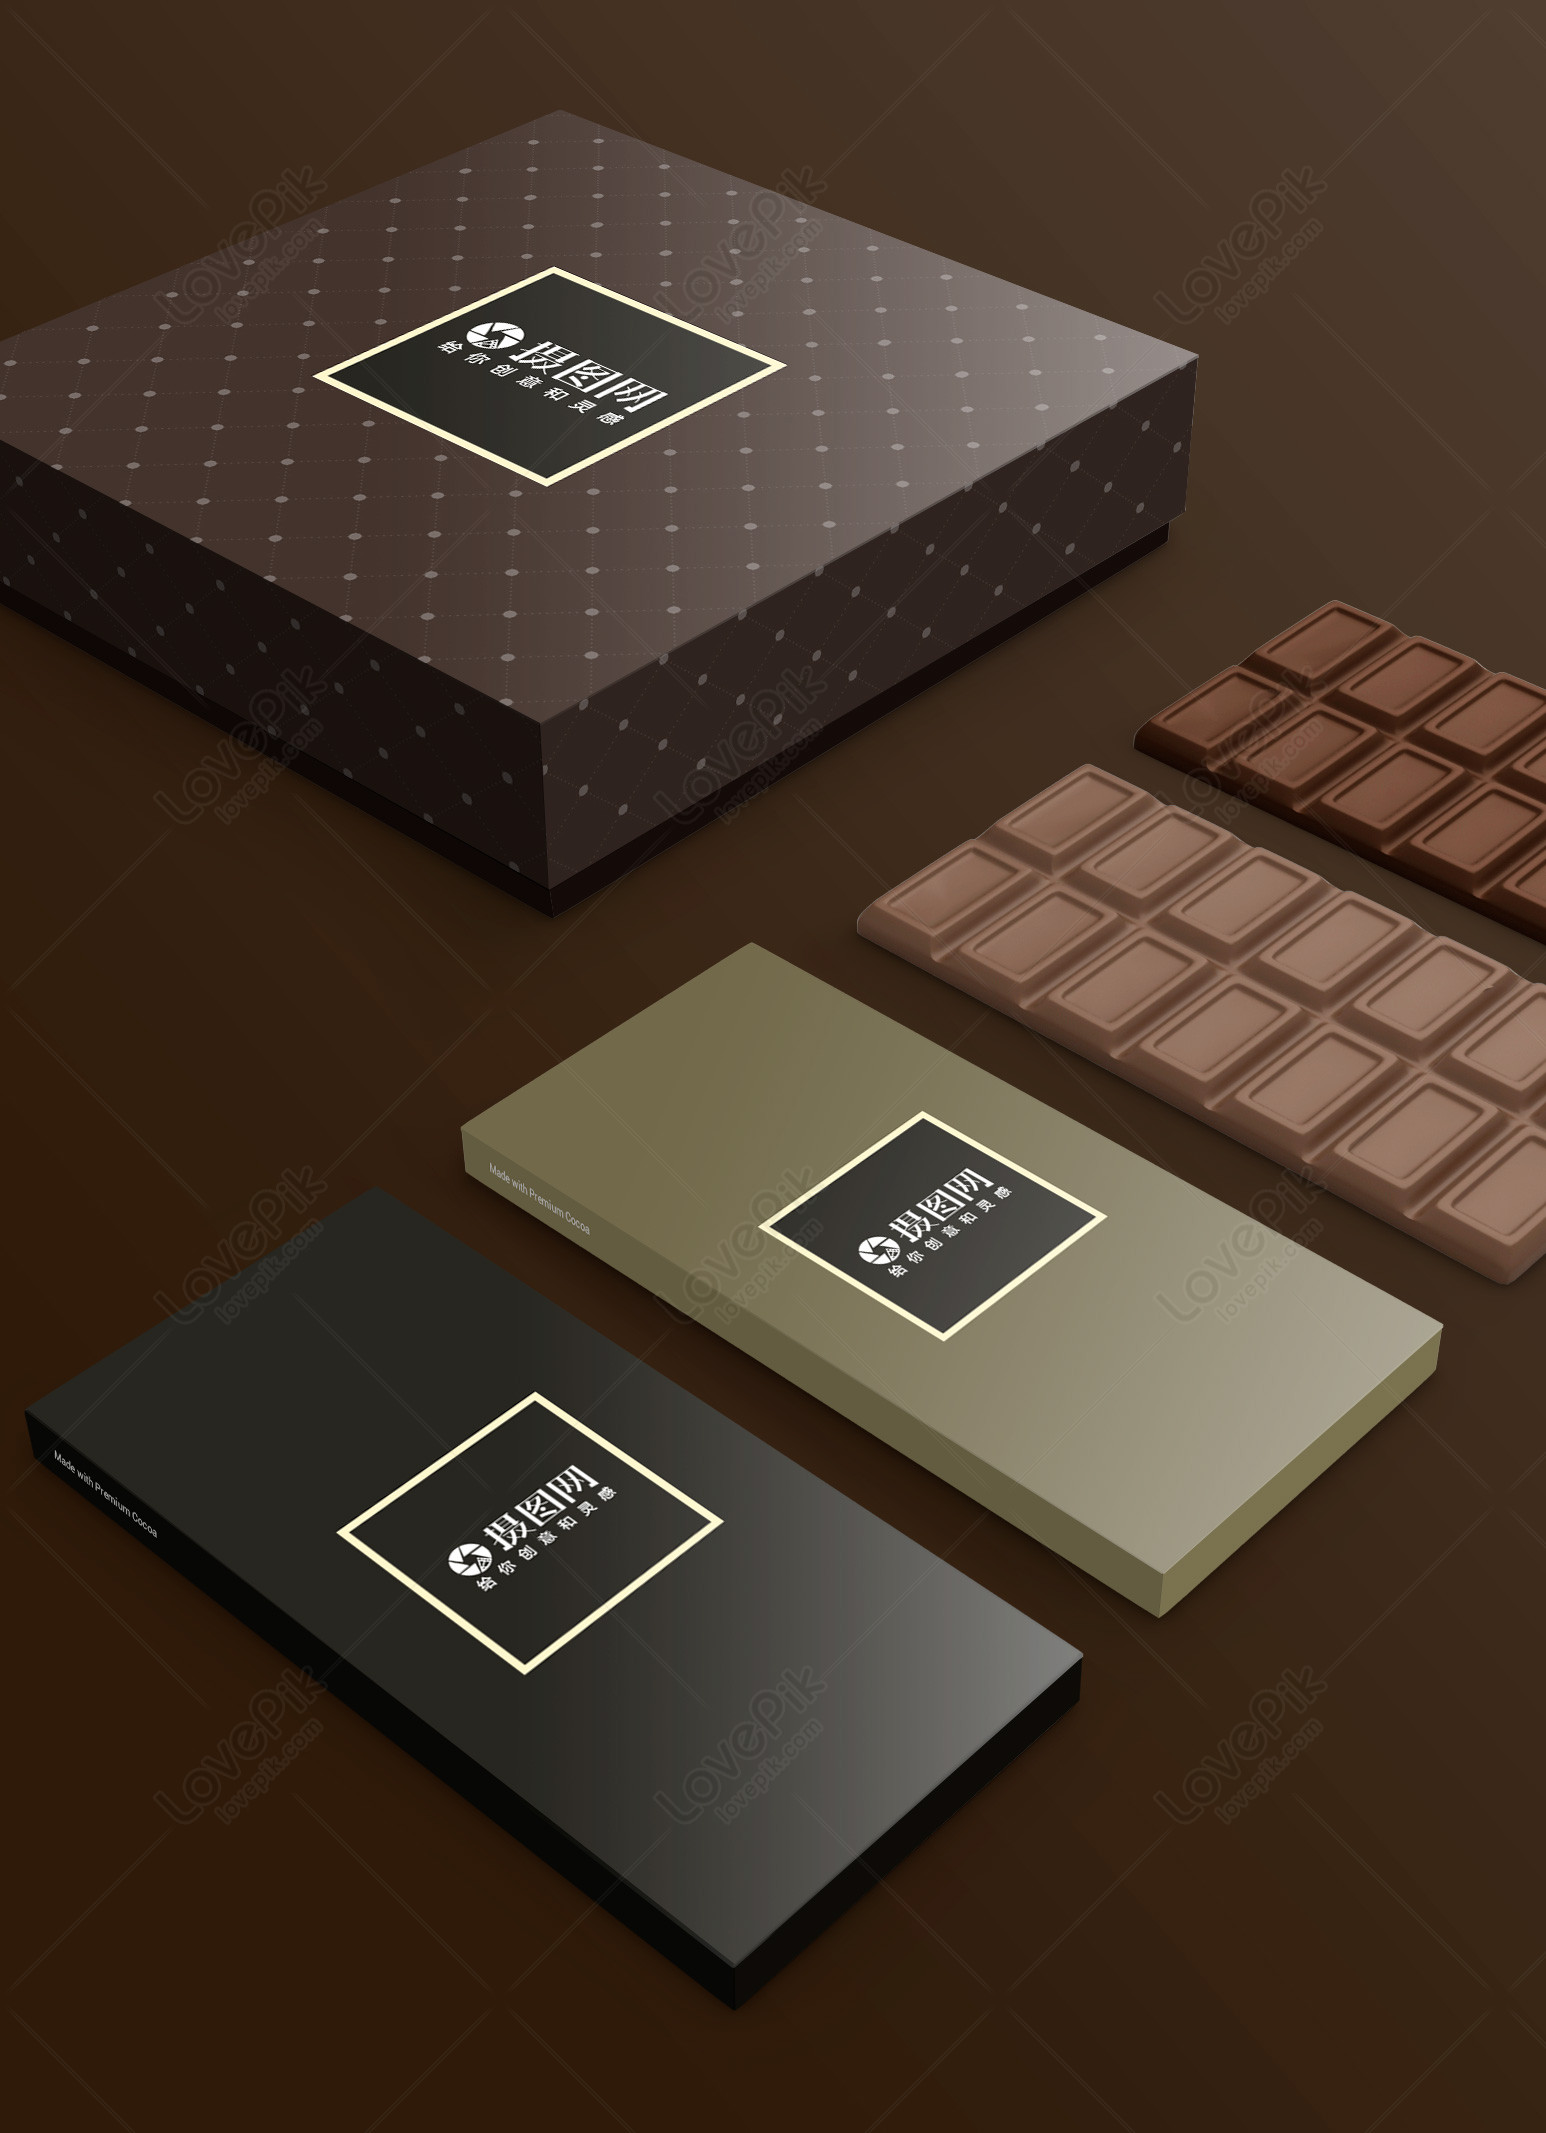 Download Chocolate Box Packaging Mockup Template Image Picture Free Download 400820341 Lovepik Com PSD Mockup Templates